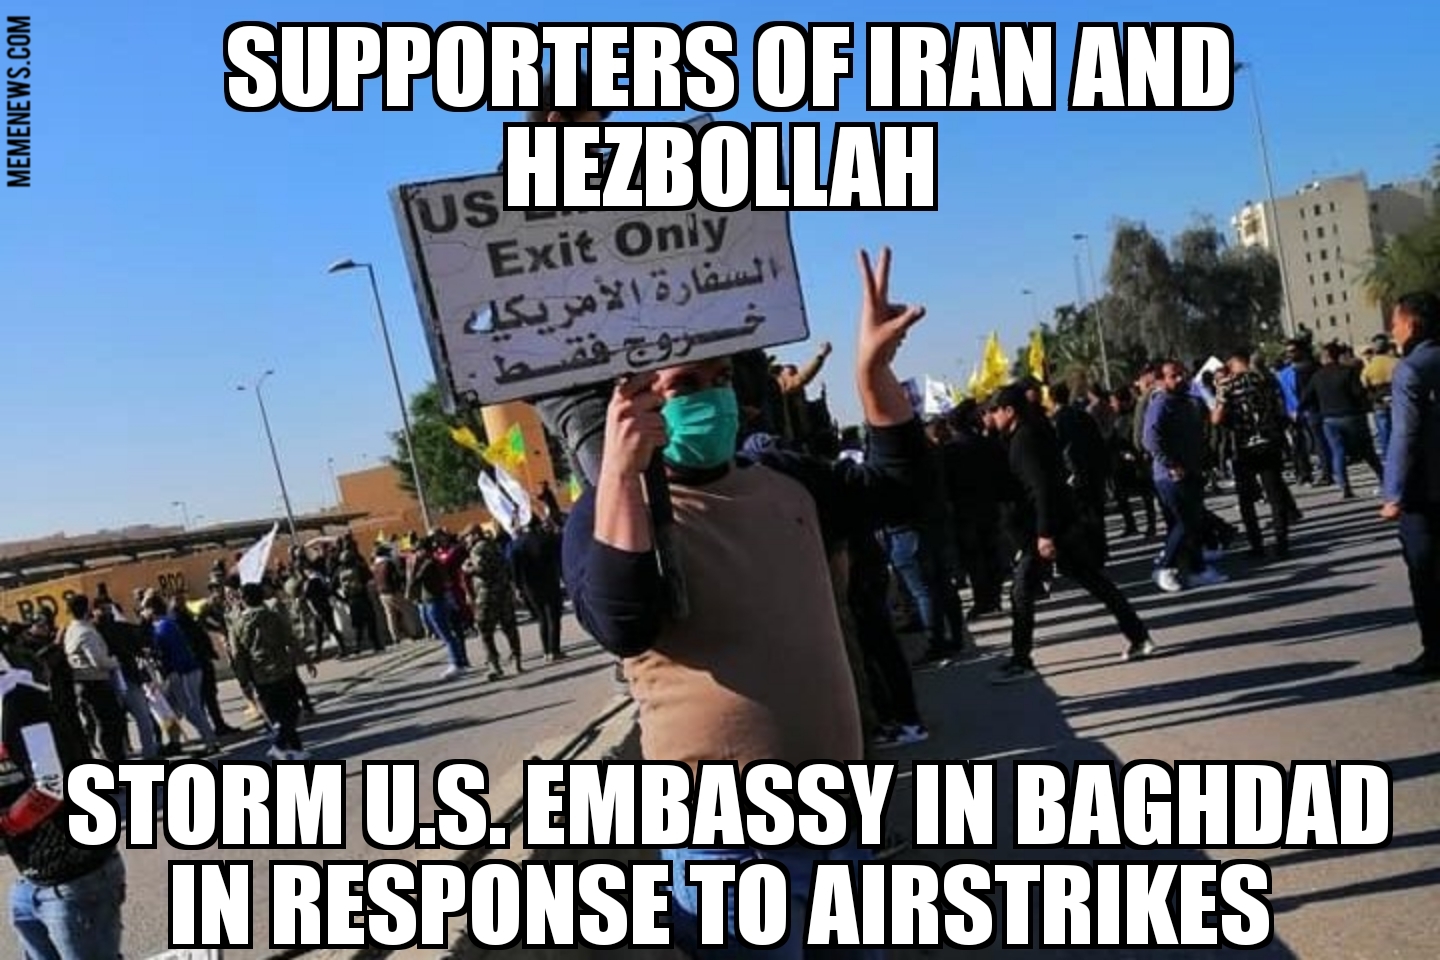 Iran supporters storm U.S. embassy in Baghdad